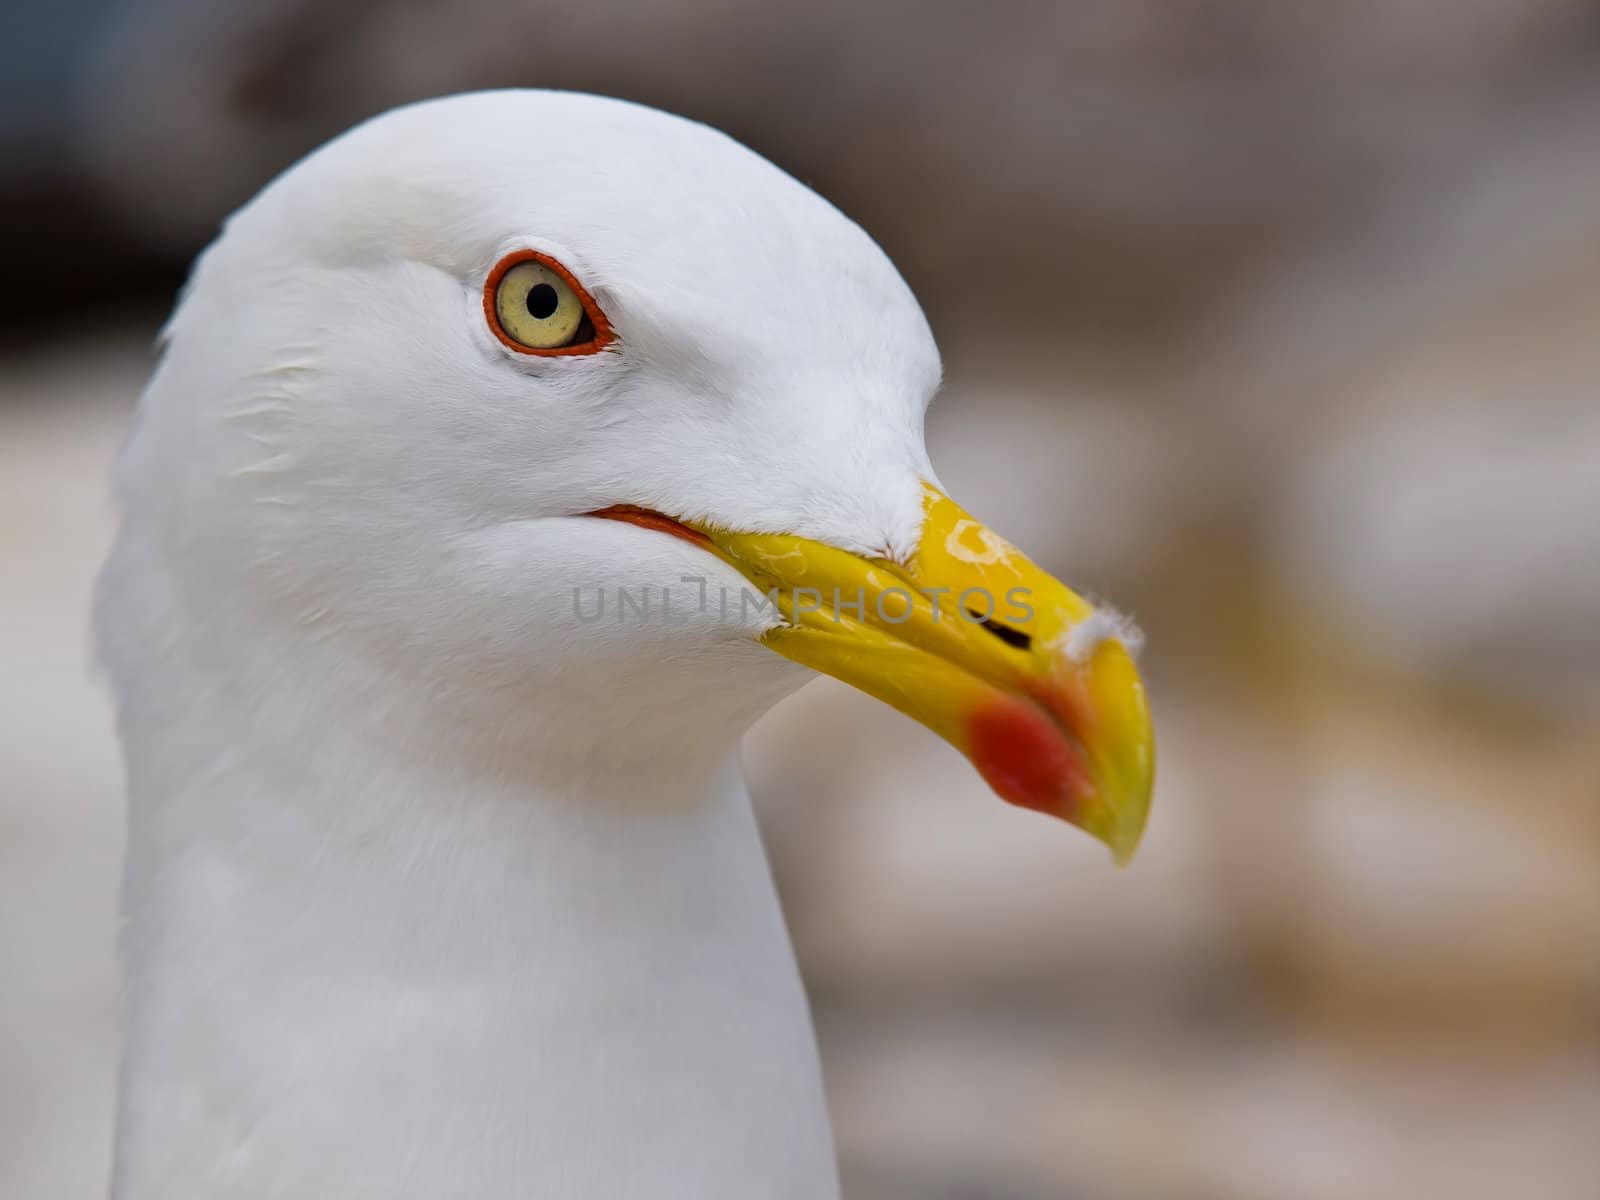 red eye and yellow beak of a young seagull